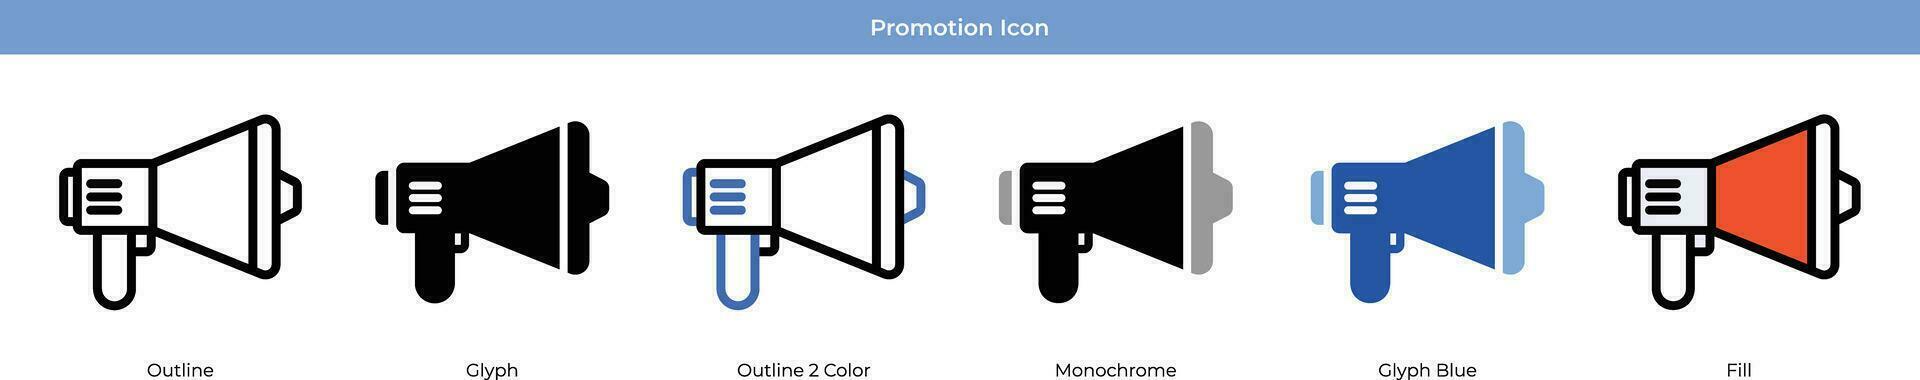 Promotion set with 6 style vector